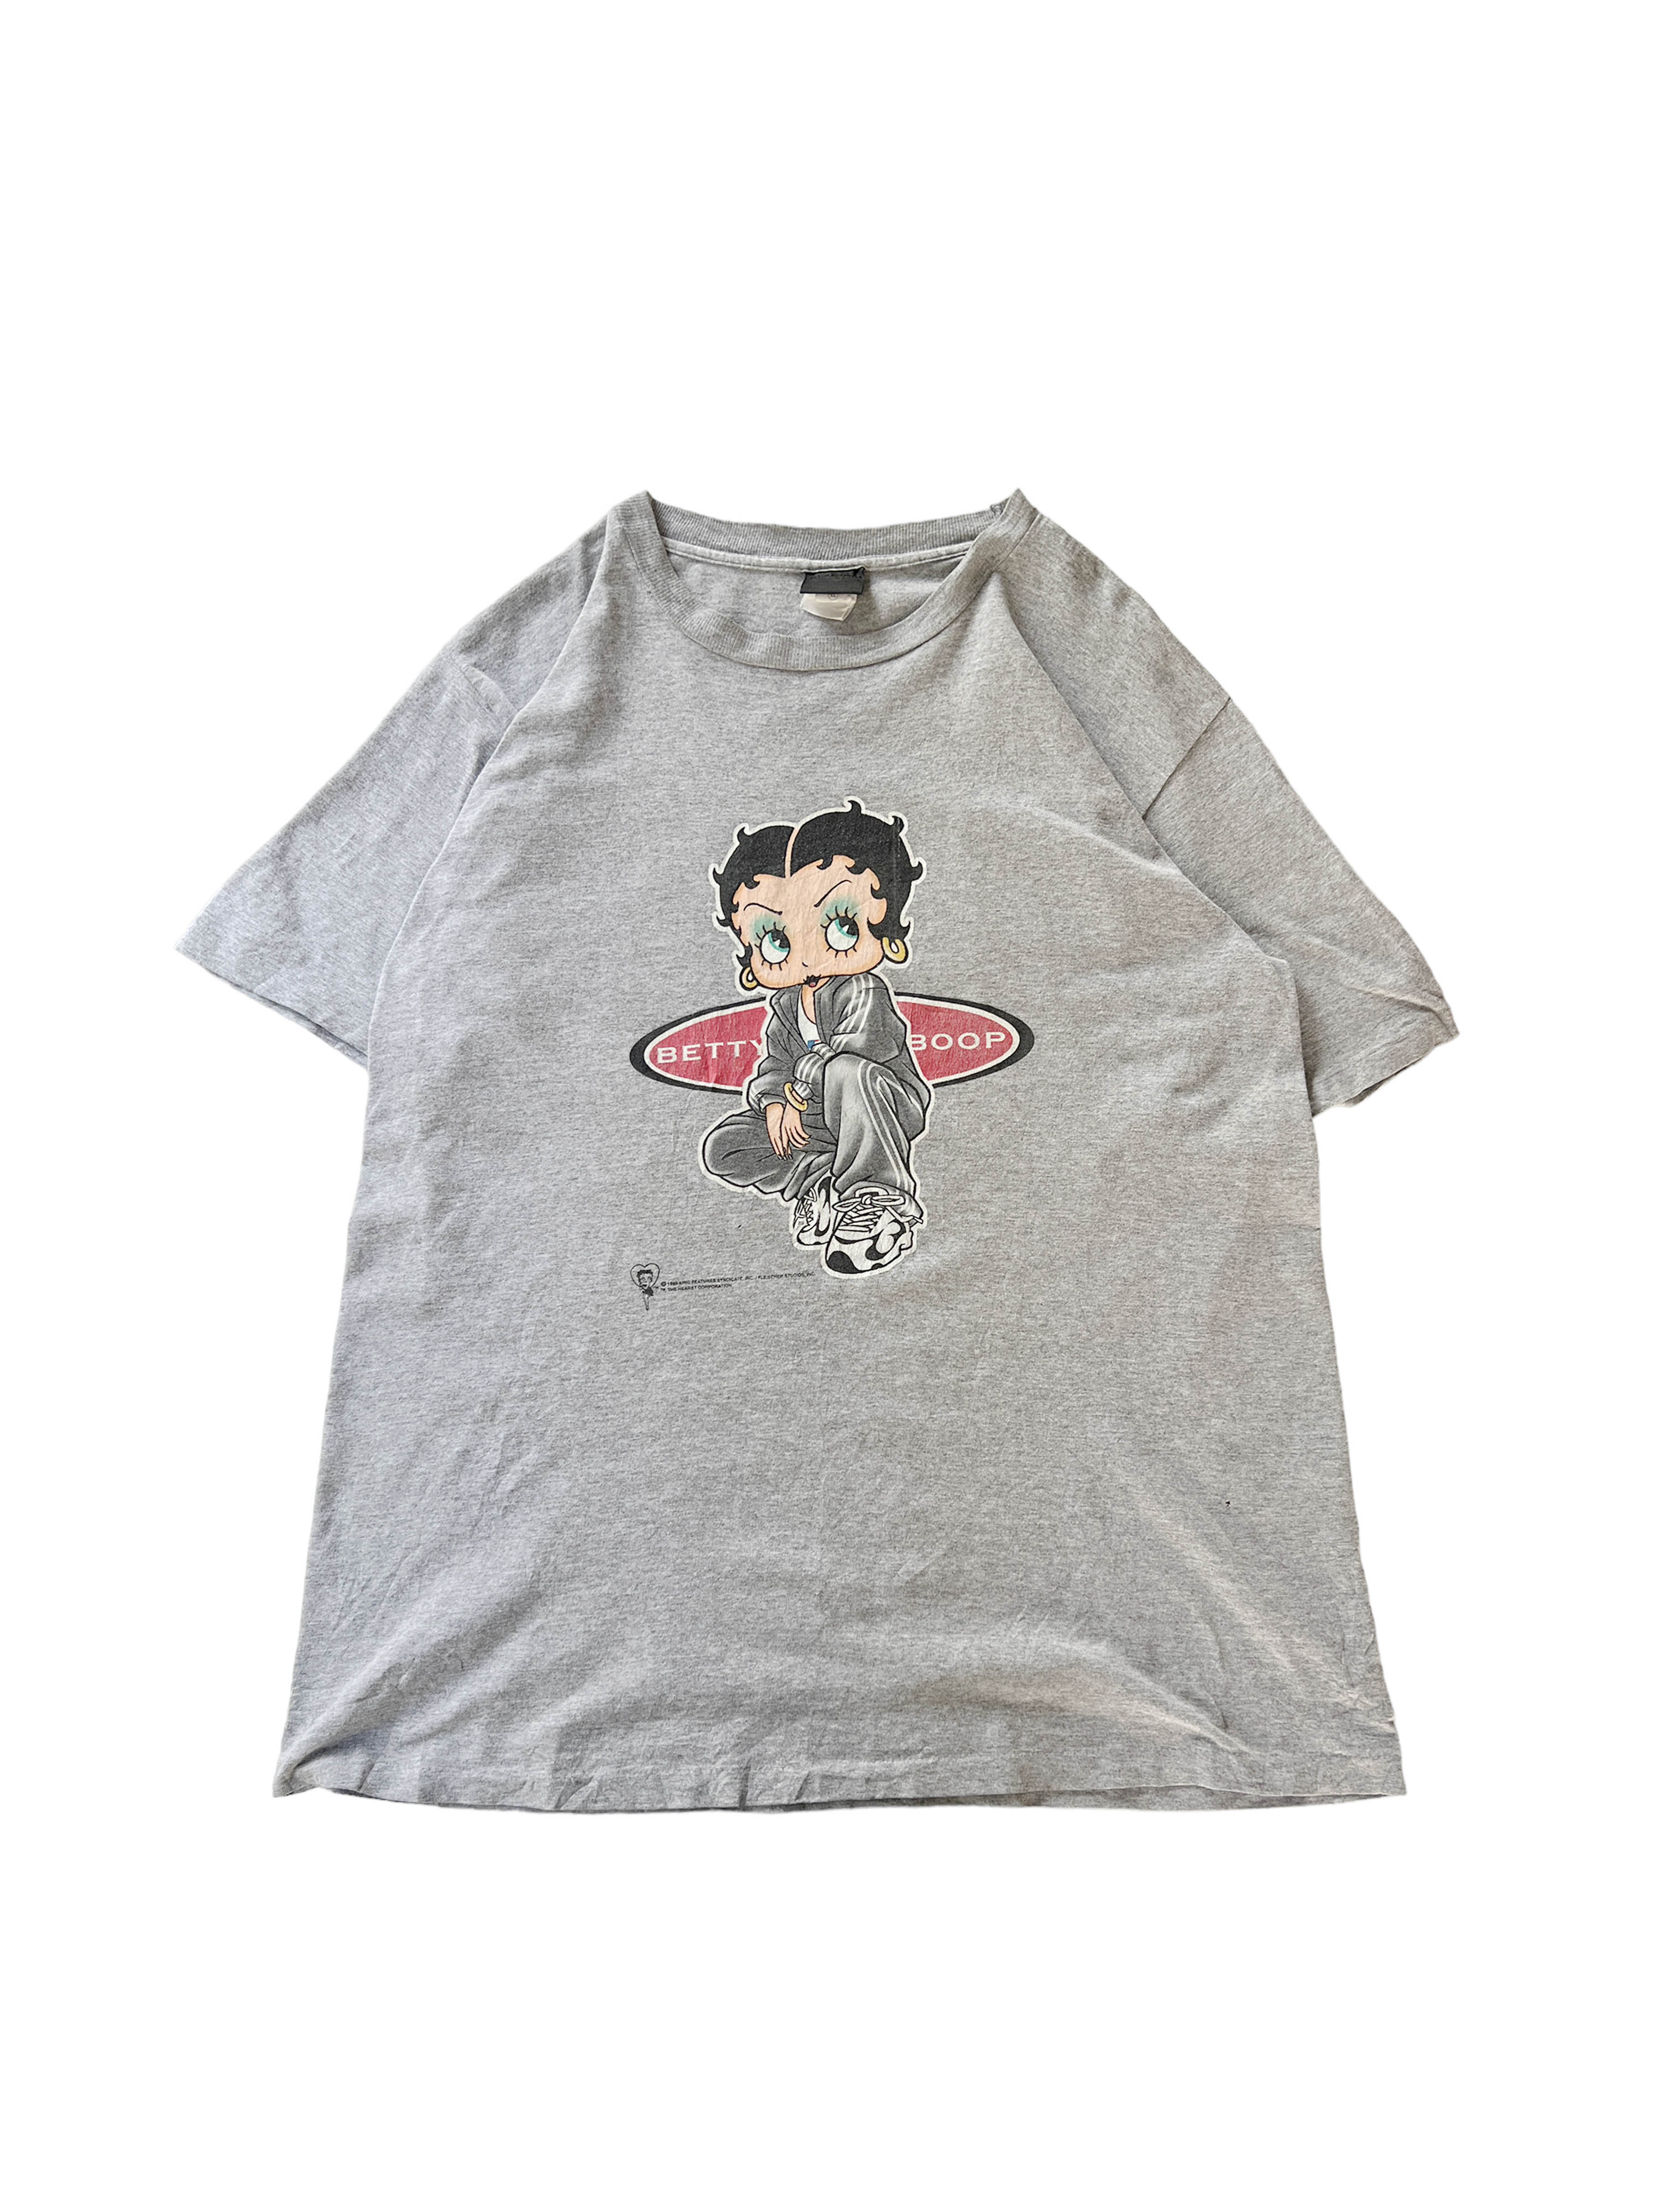 1998 BETTY BOOP Y2K t-shirts (made in USA)